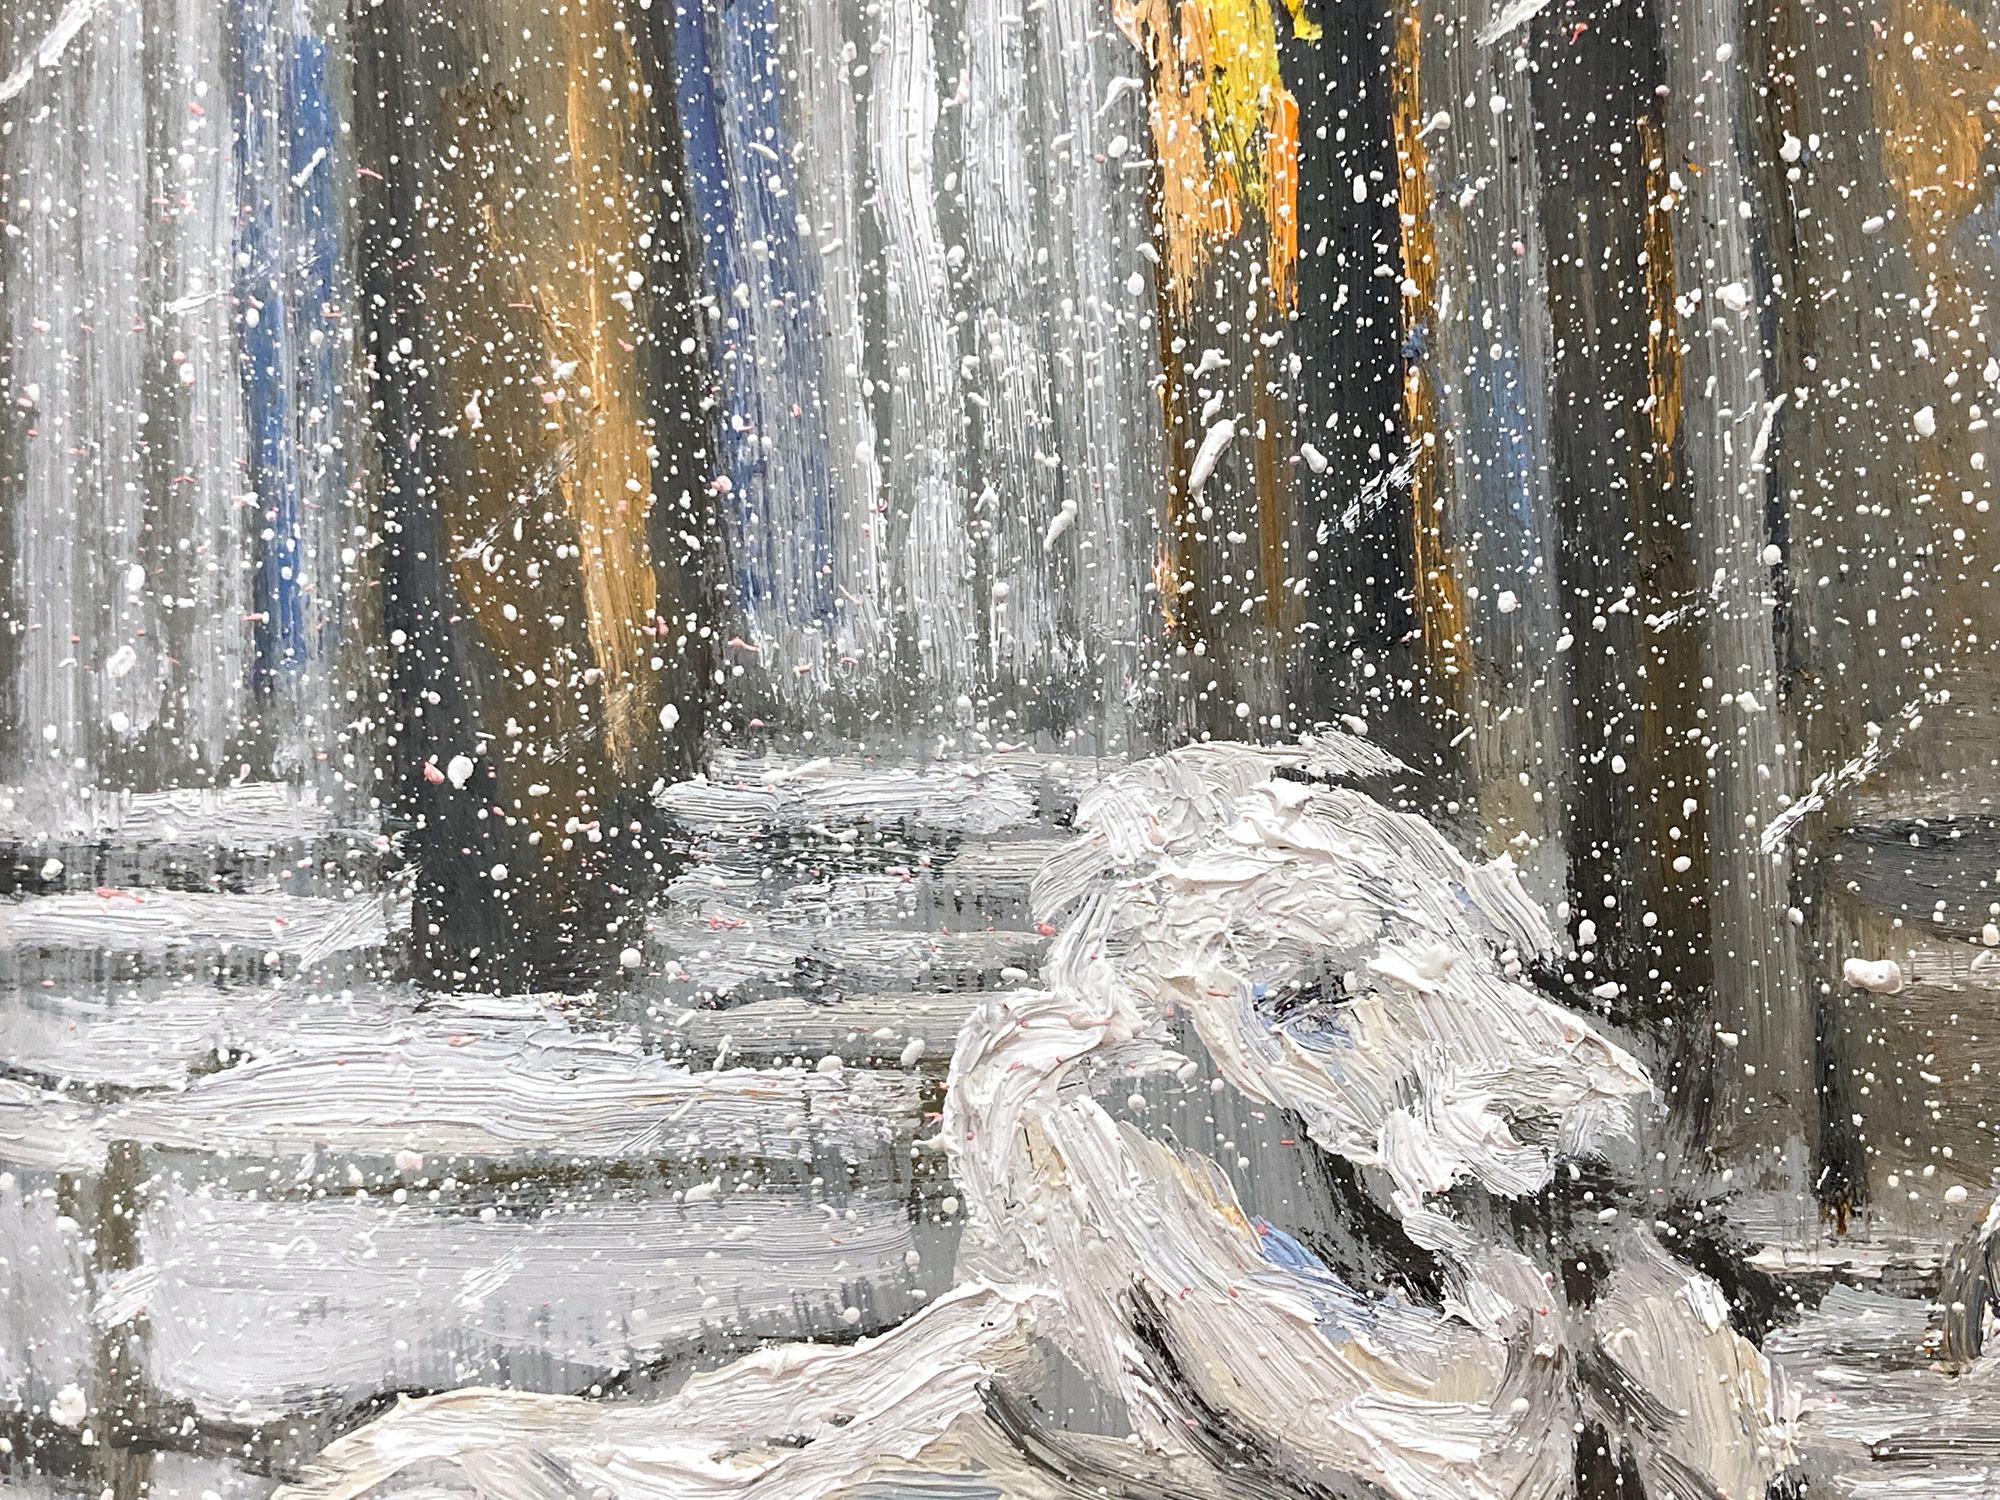 Impressionist New York City winter city-scene depicting The Guardian New York City Library on 42nd Street.  with pedestrians going through the snow under umbrellas in a most intimate, yet energetic way. Christopher is known for capturing the beauty